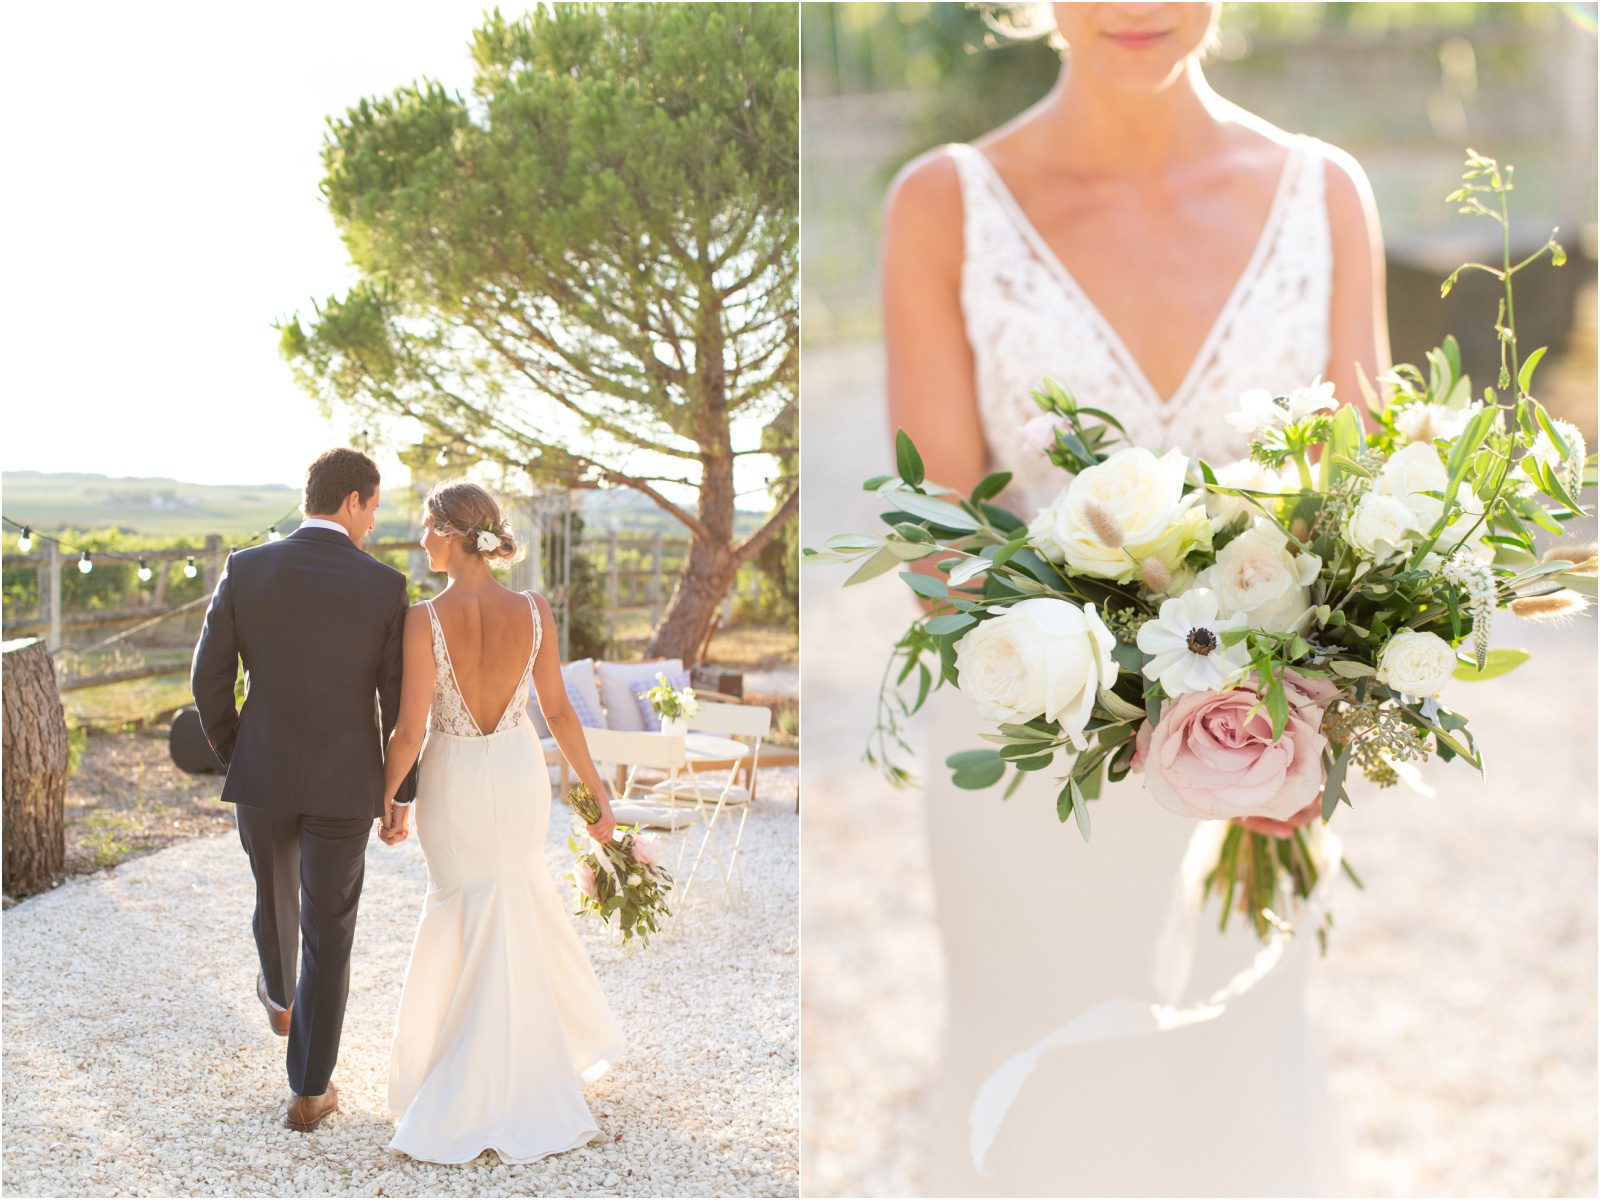 South of France fine art wedding photography